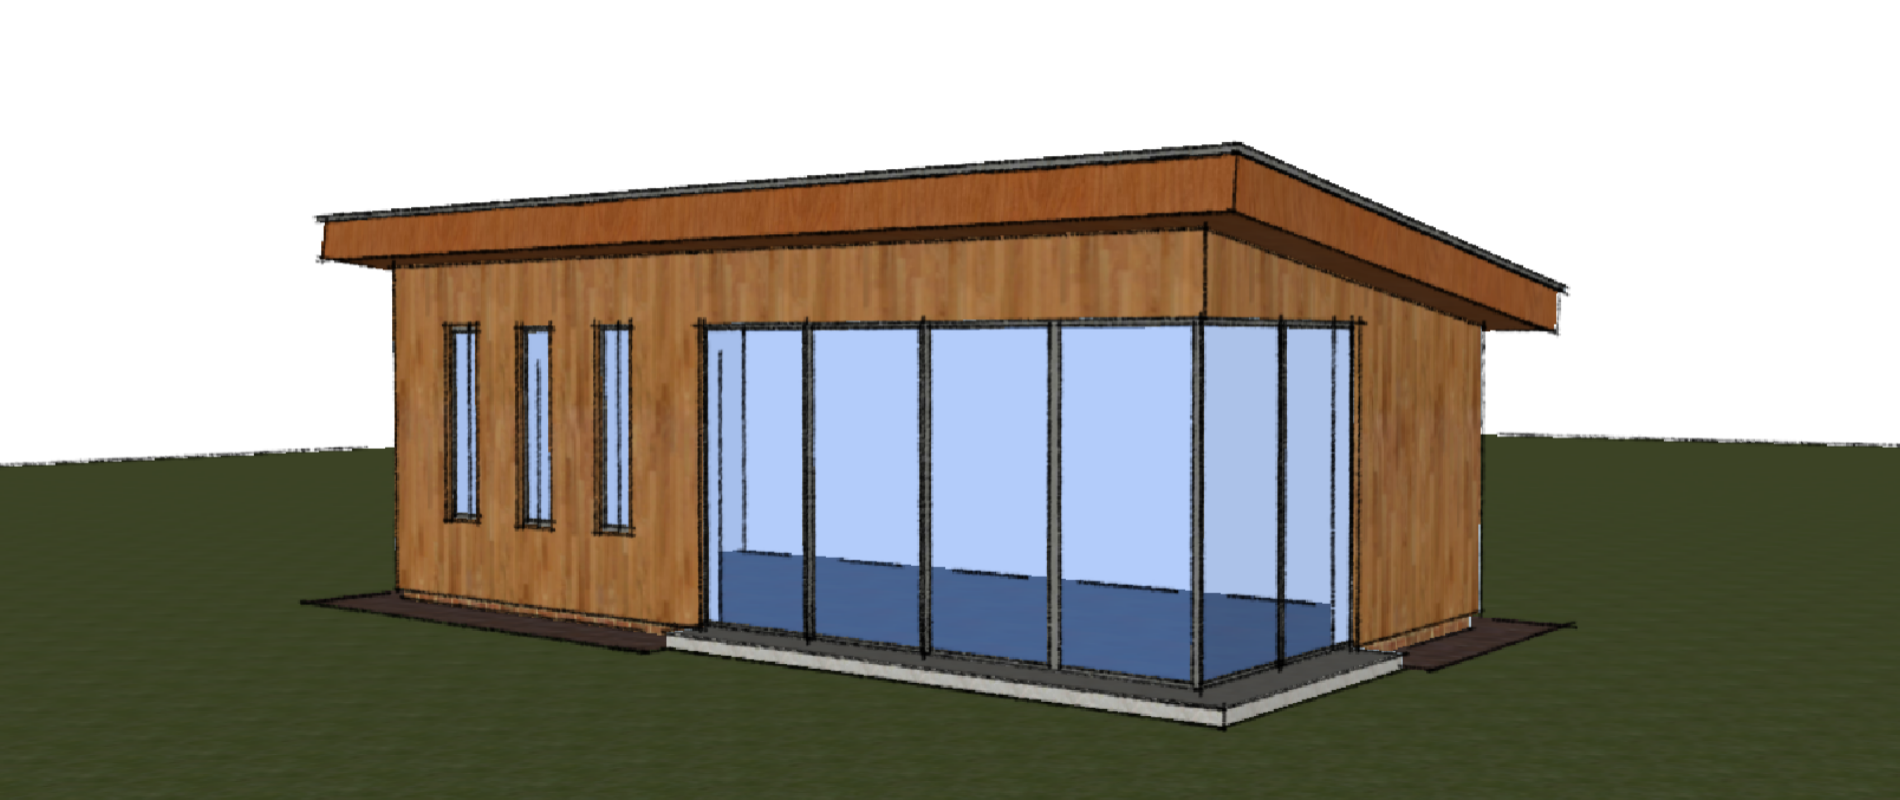 Planning Permission For A Shed, What Are The Regulations For Garden Sheds